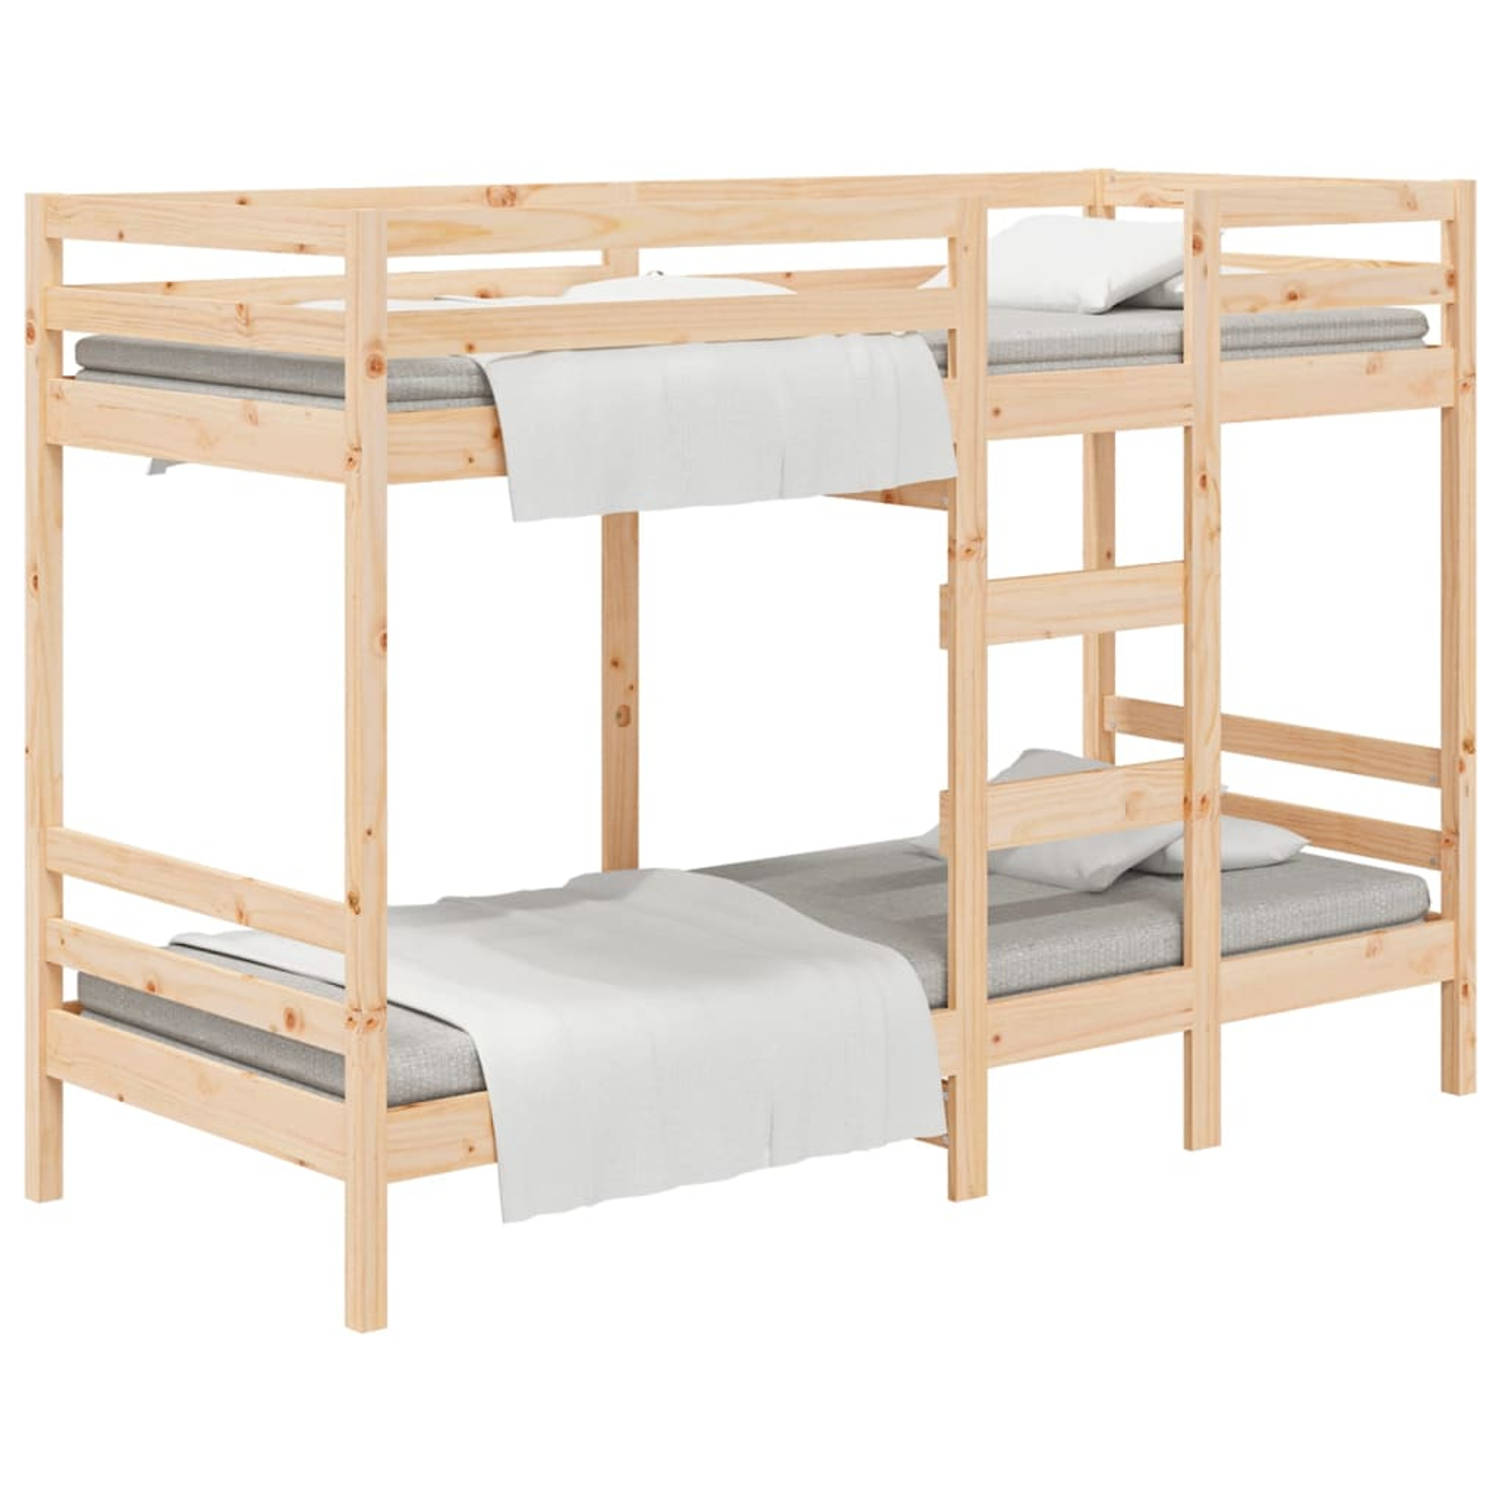 The Living Store Stapelbed massief grenenhout 90x200 cm - Bed